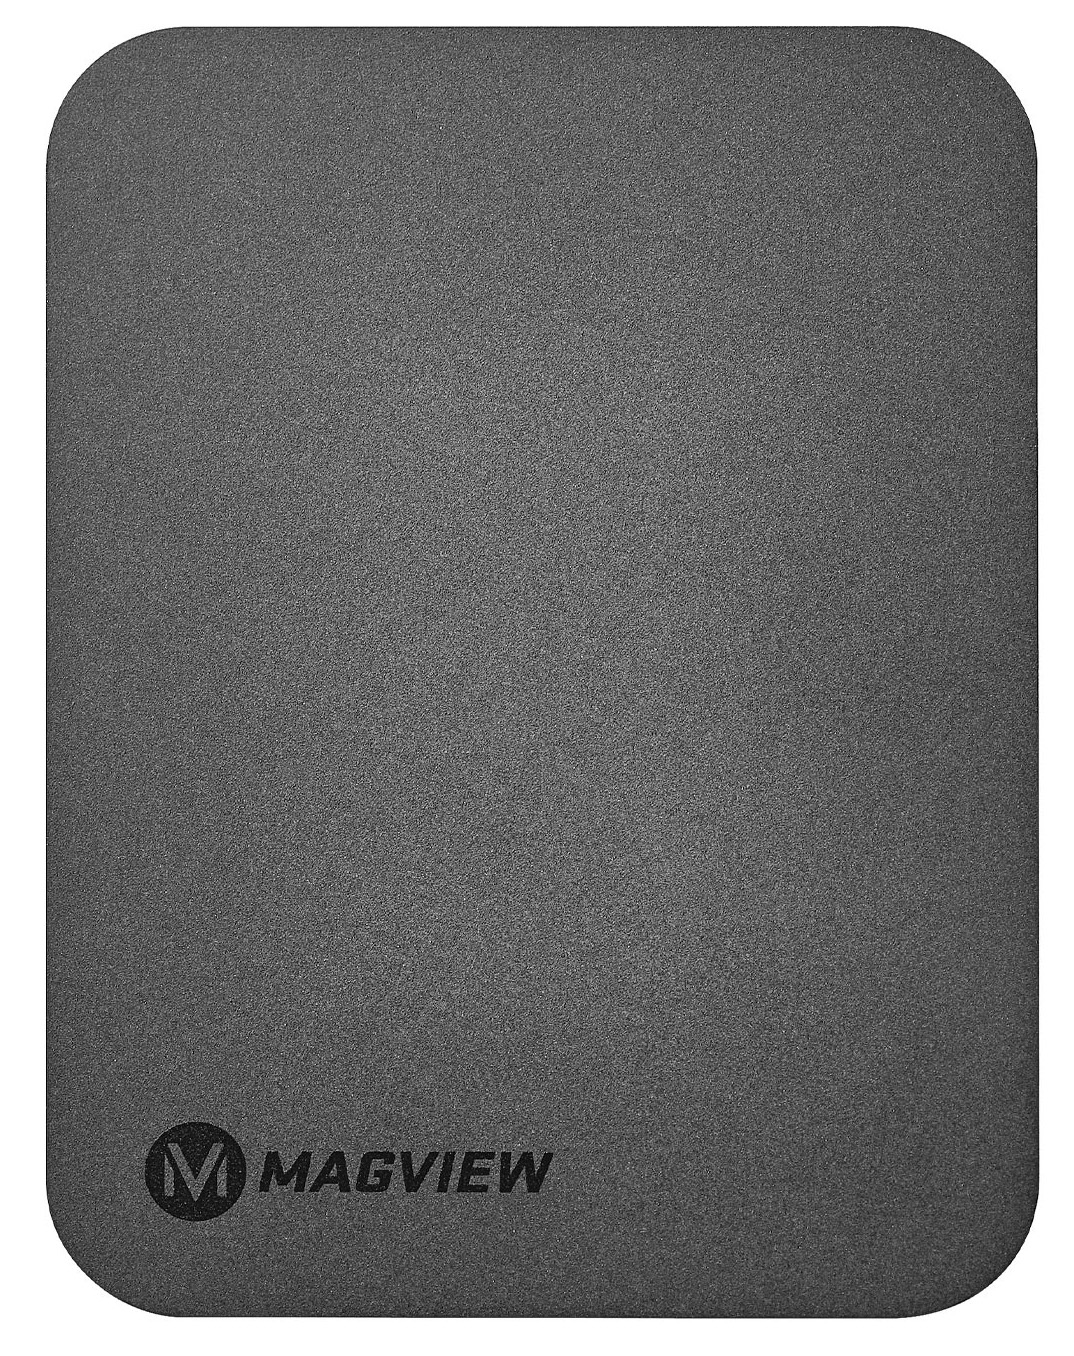 MAGVIEW PHONE PLATE 3 PACK - New at BHC